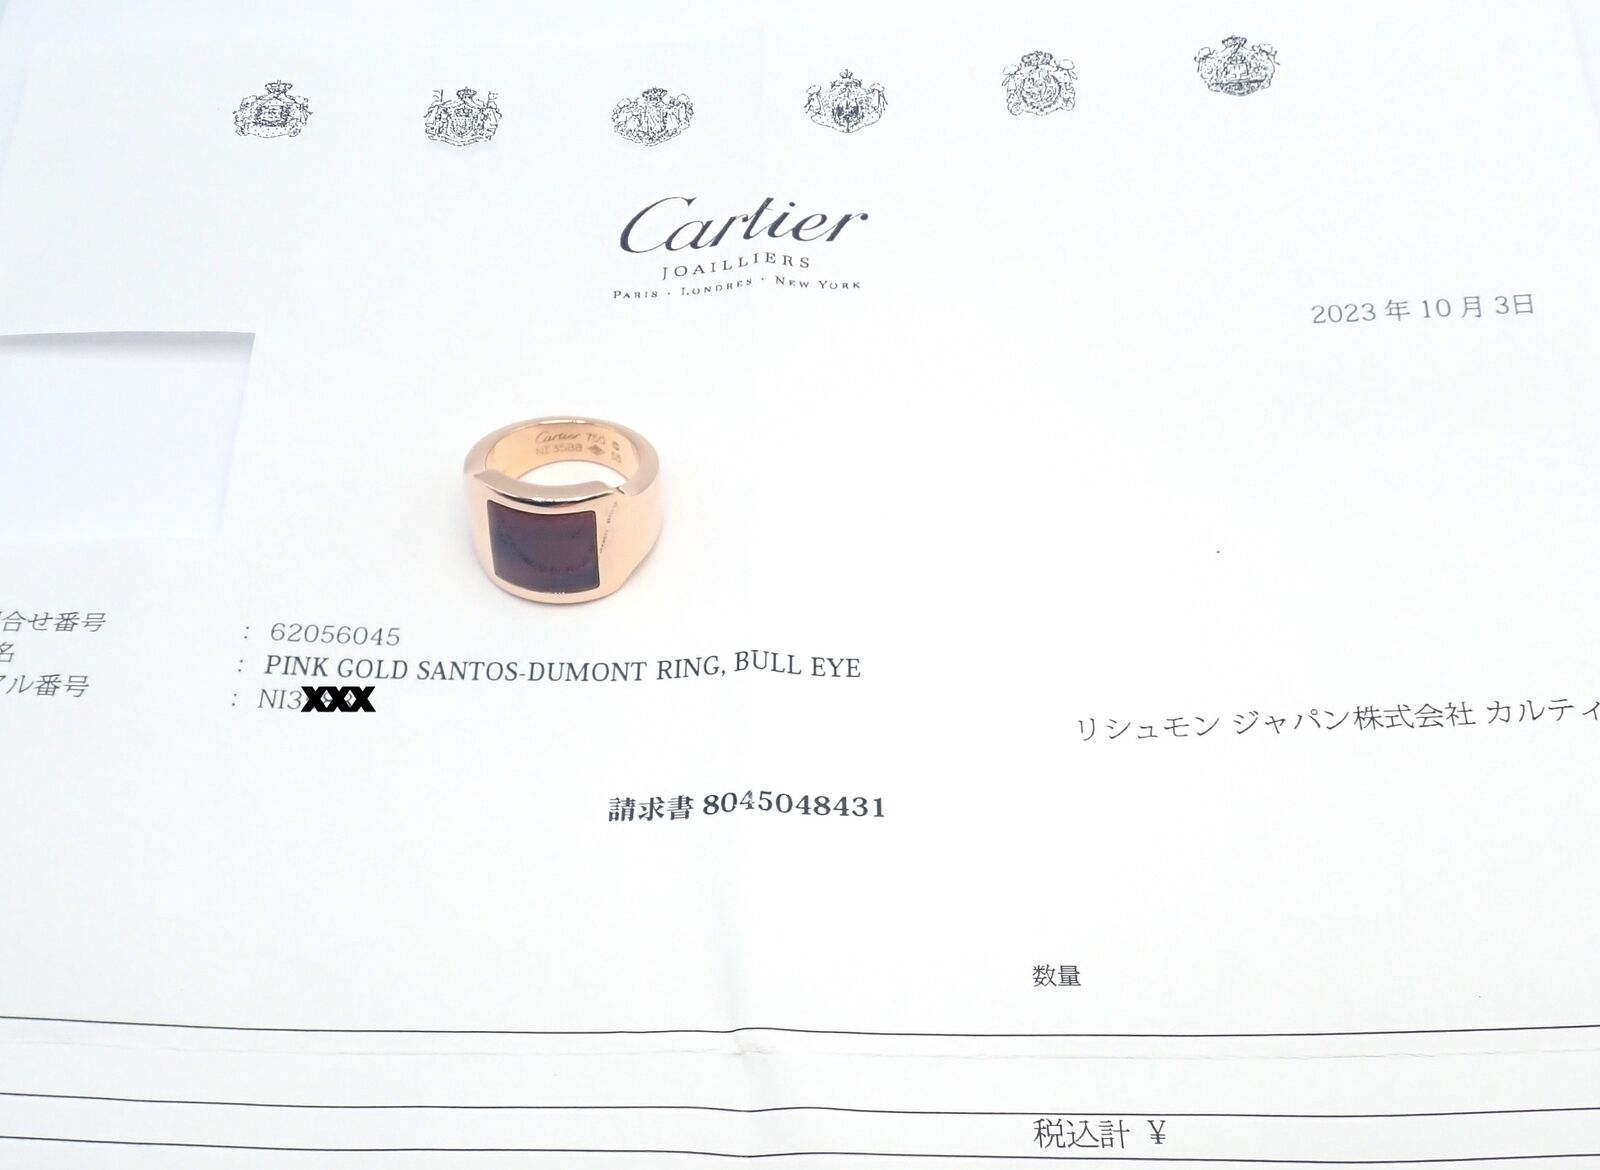 Cartier Jewelry & Watches:Fine Jewelry:Rings Authentic! Cartier 18k Rose Gold Santos Dumont Bull Eye Quartz Ring Certificate